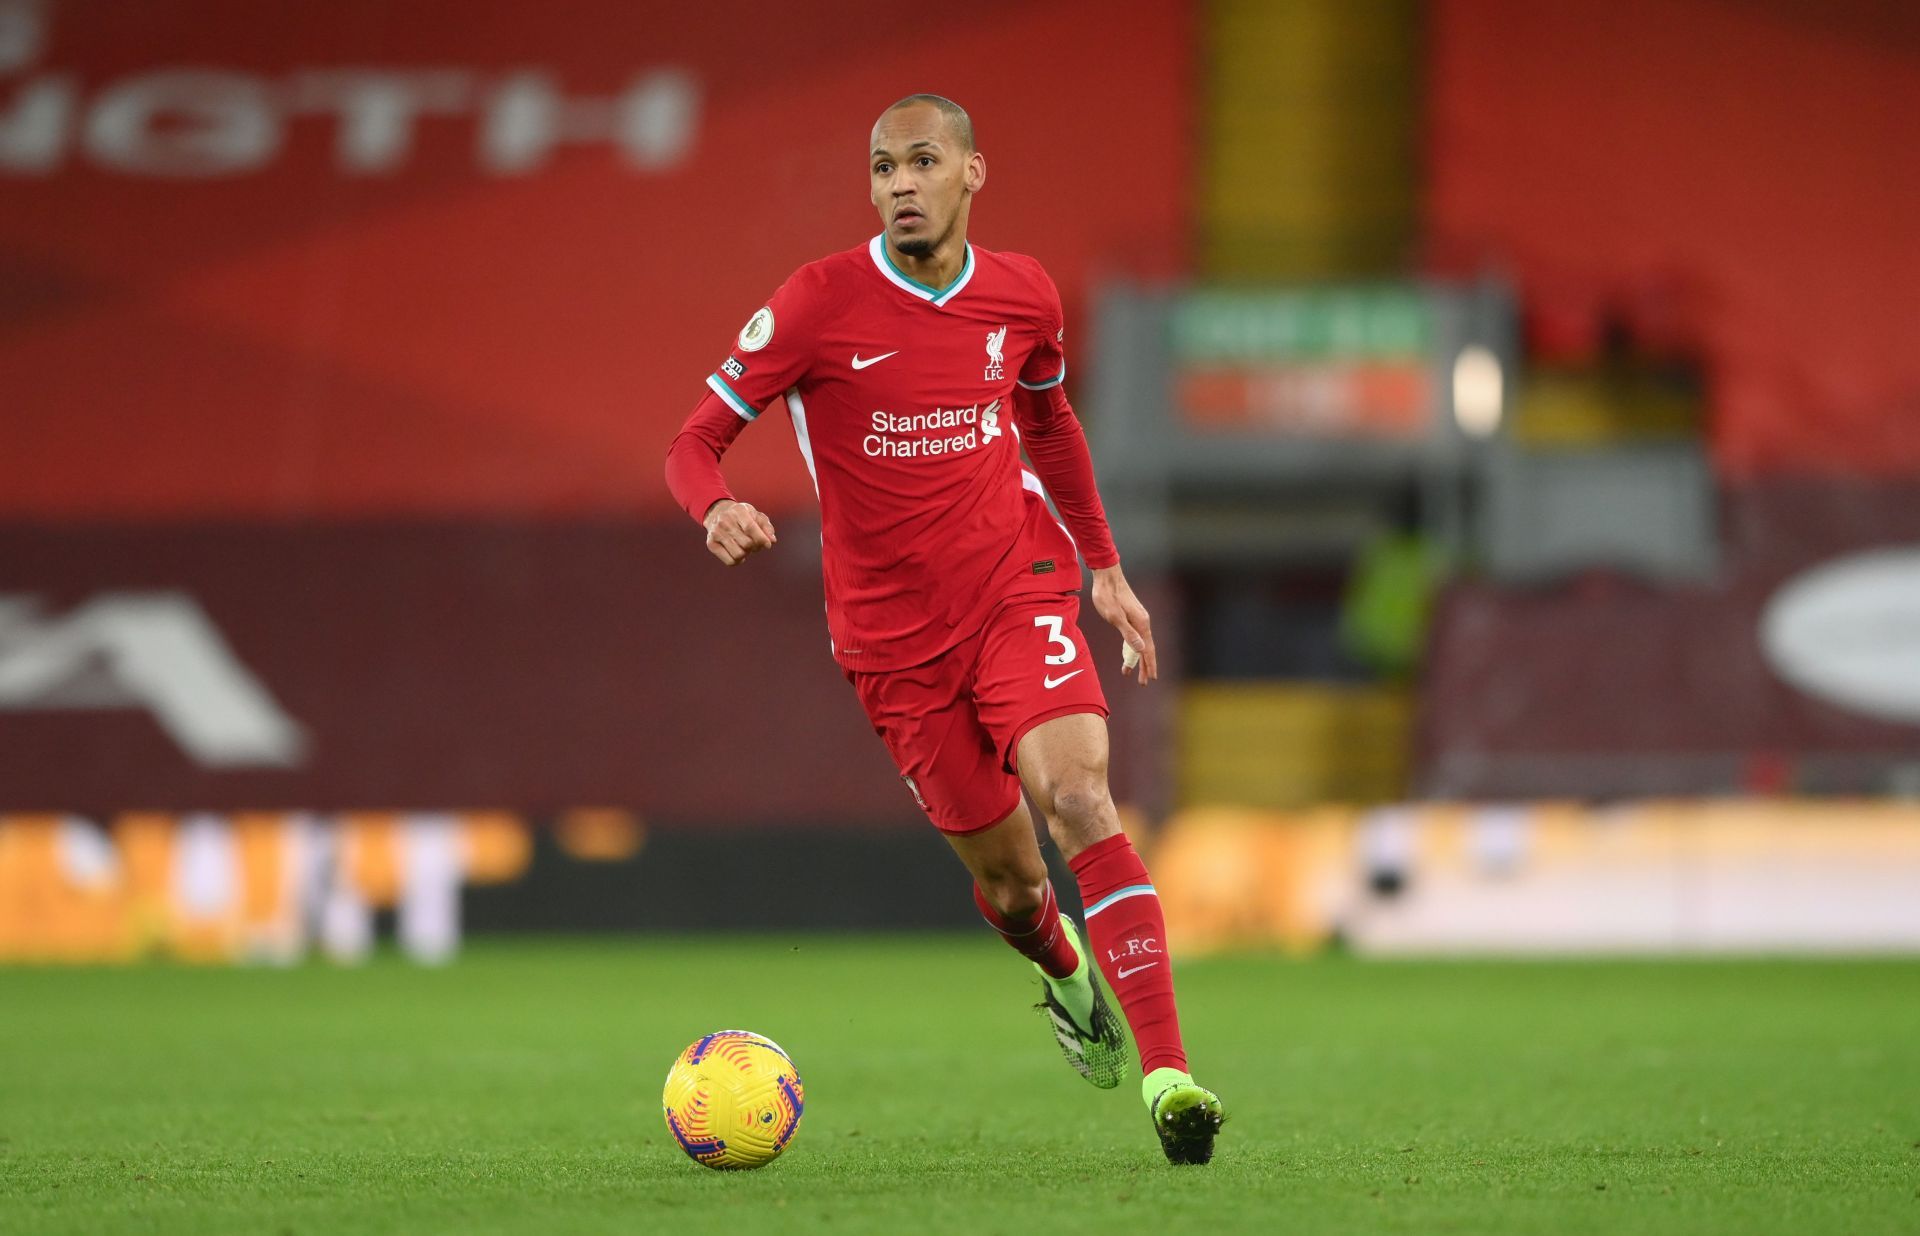 Fabinho played right-back earlier in his career